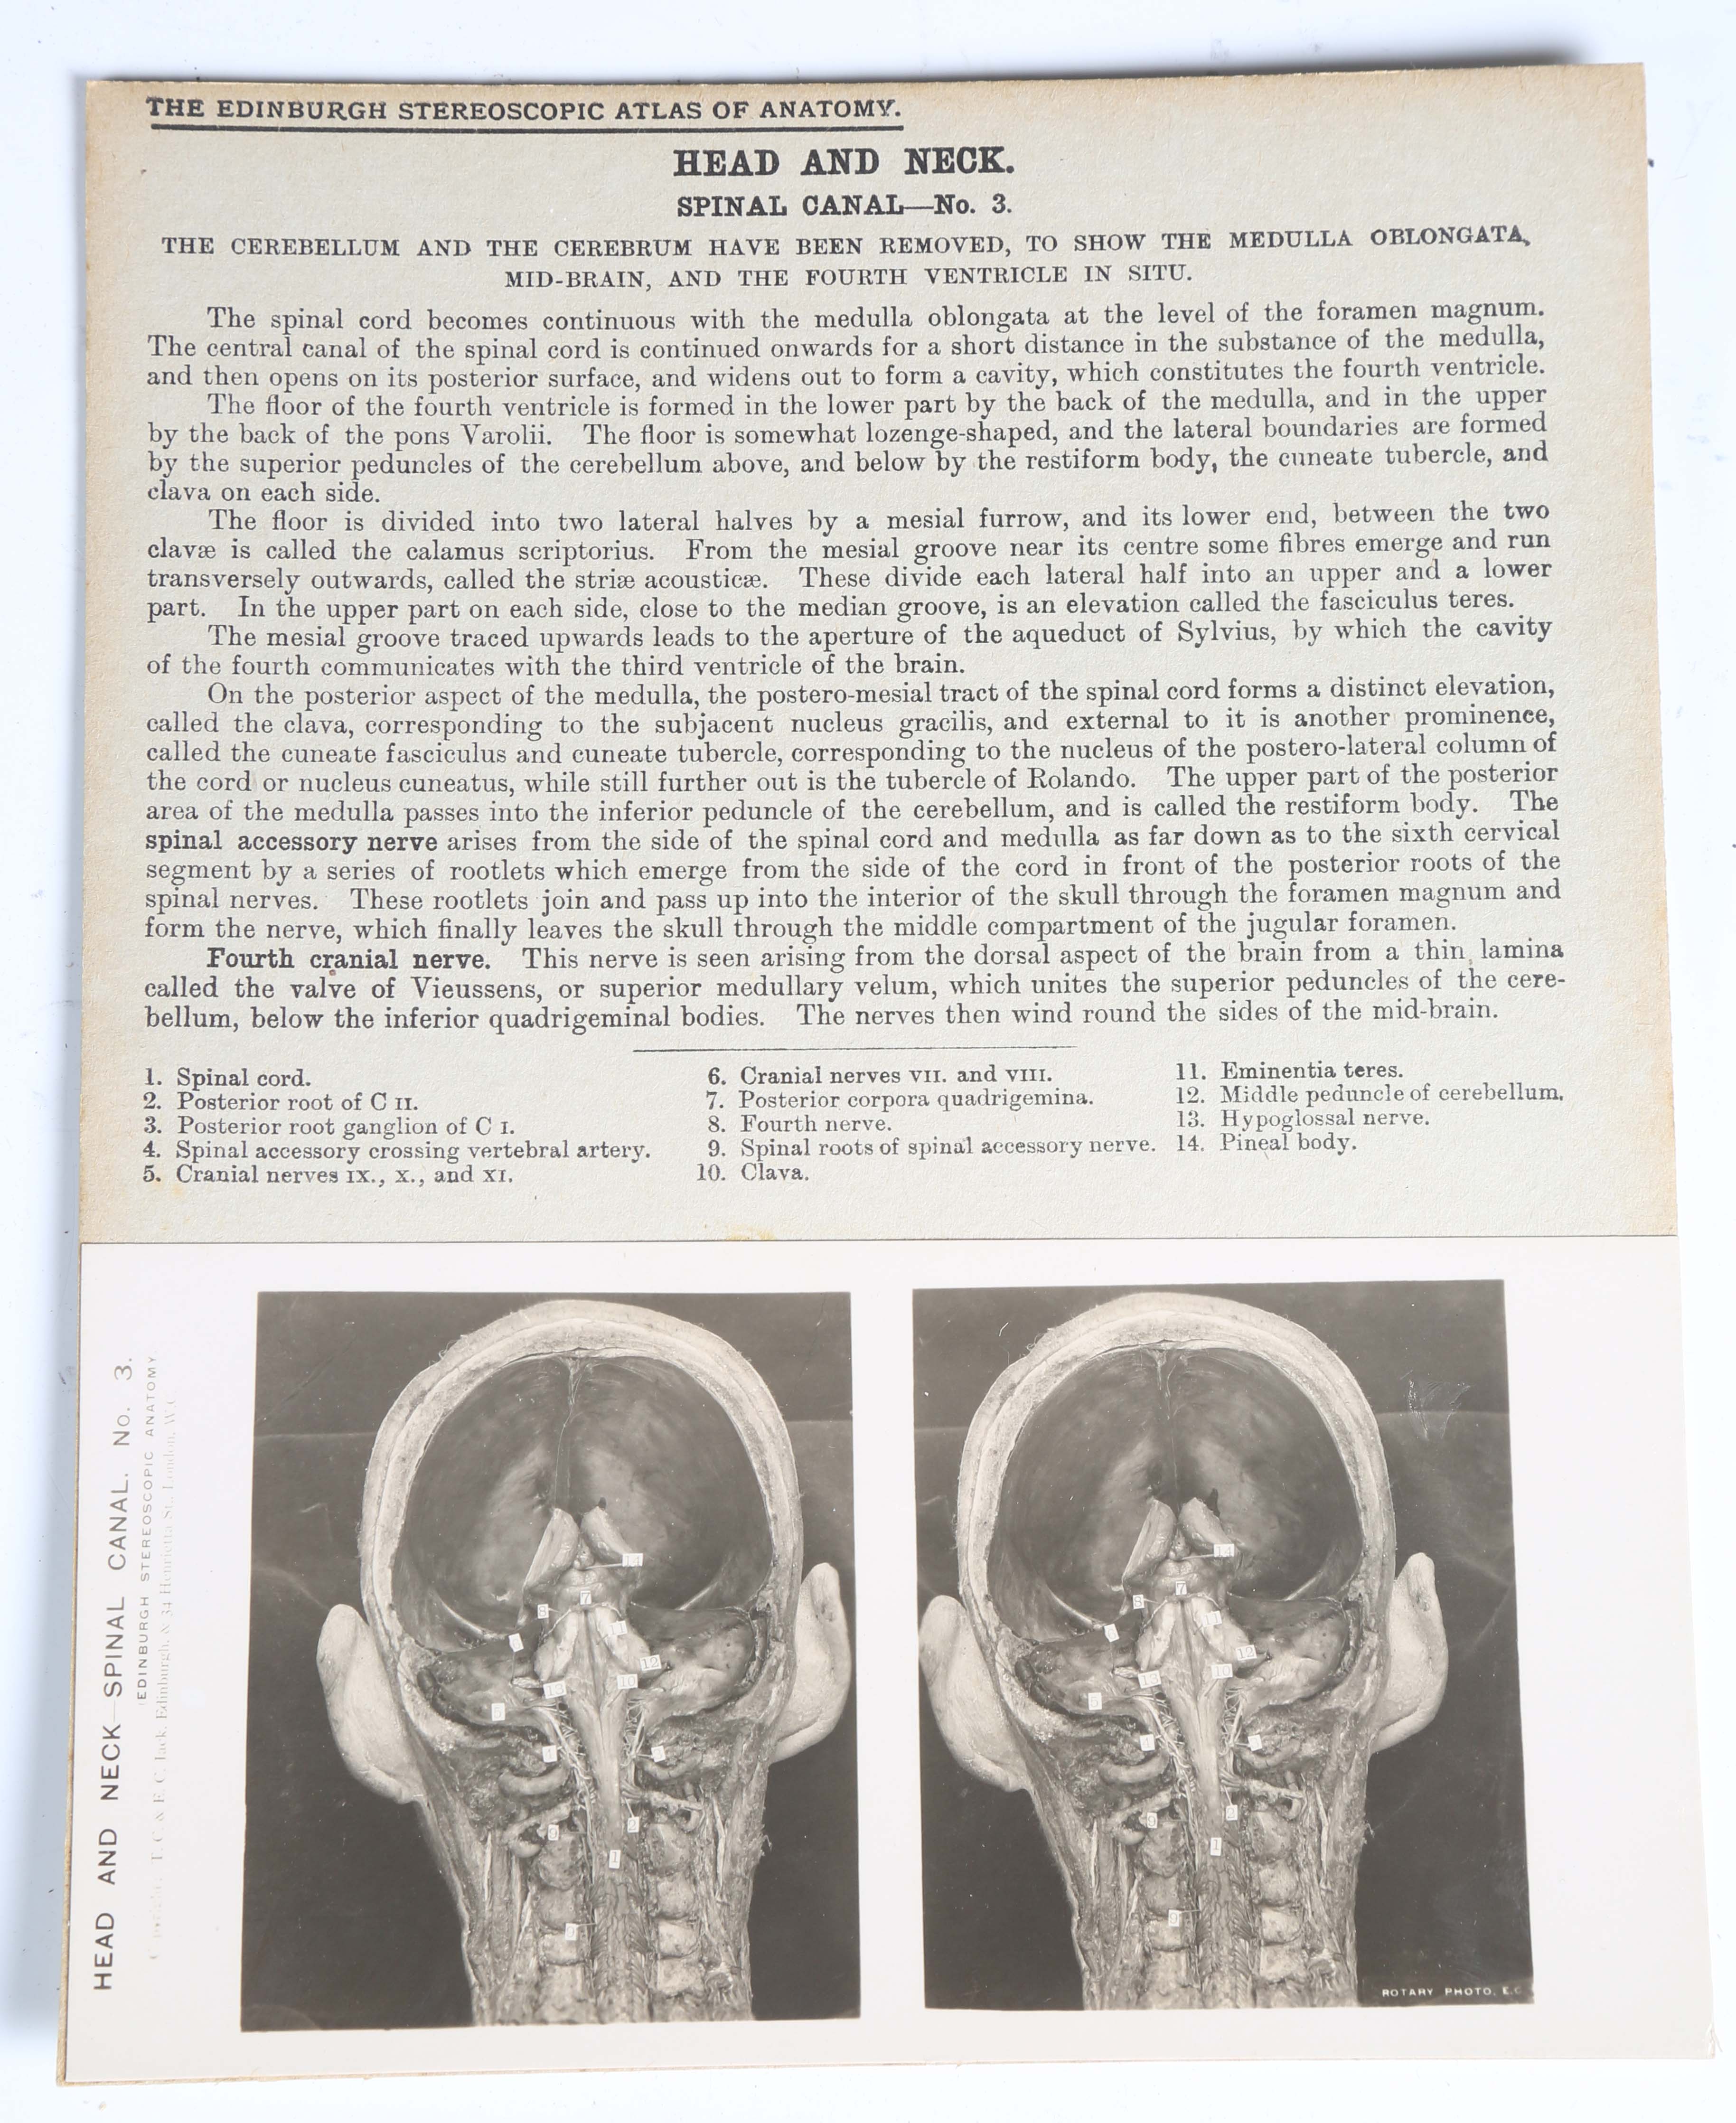 'The Edinburgh Stereoscopic Atlas of Anatomy', Waterston and Burnet, New Edition, Section IV, with a - Image 7 of 11